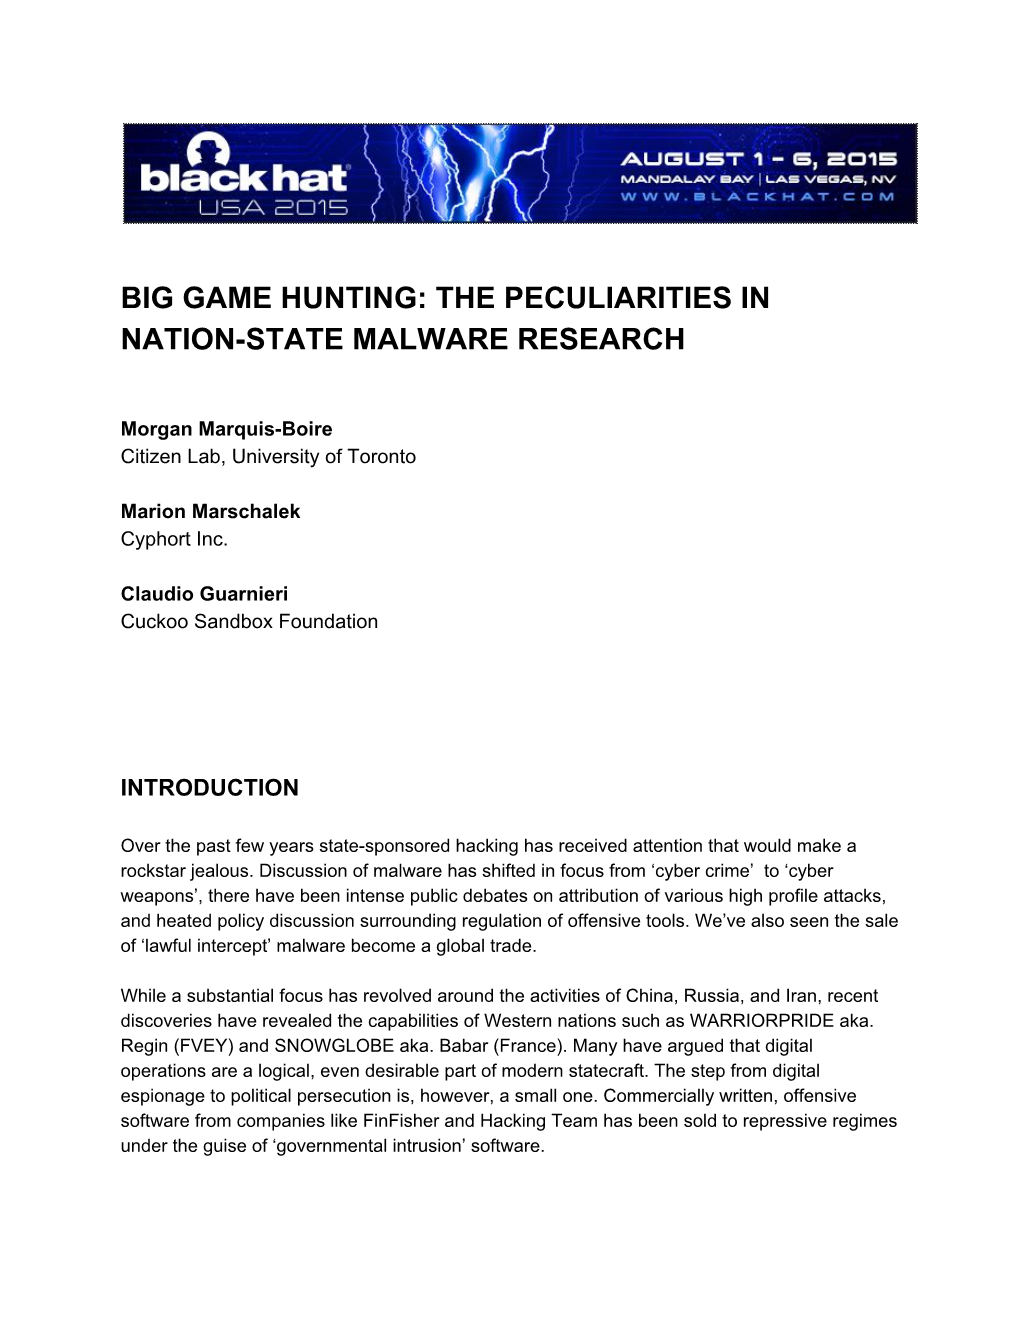 Big Game Hunting: Nation-State Malware Research